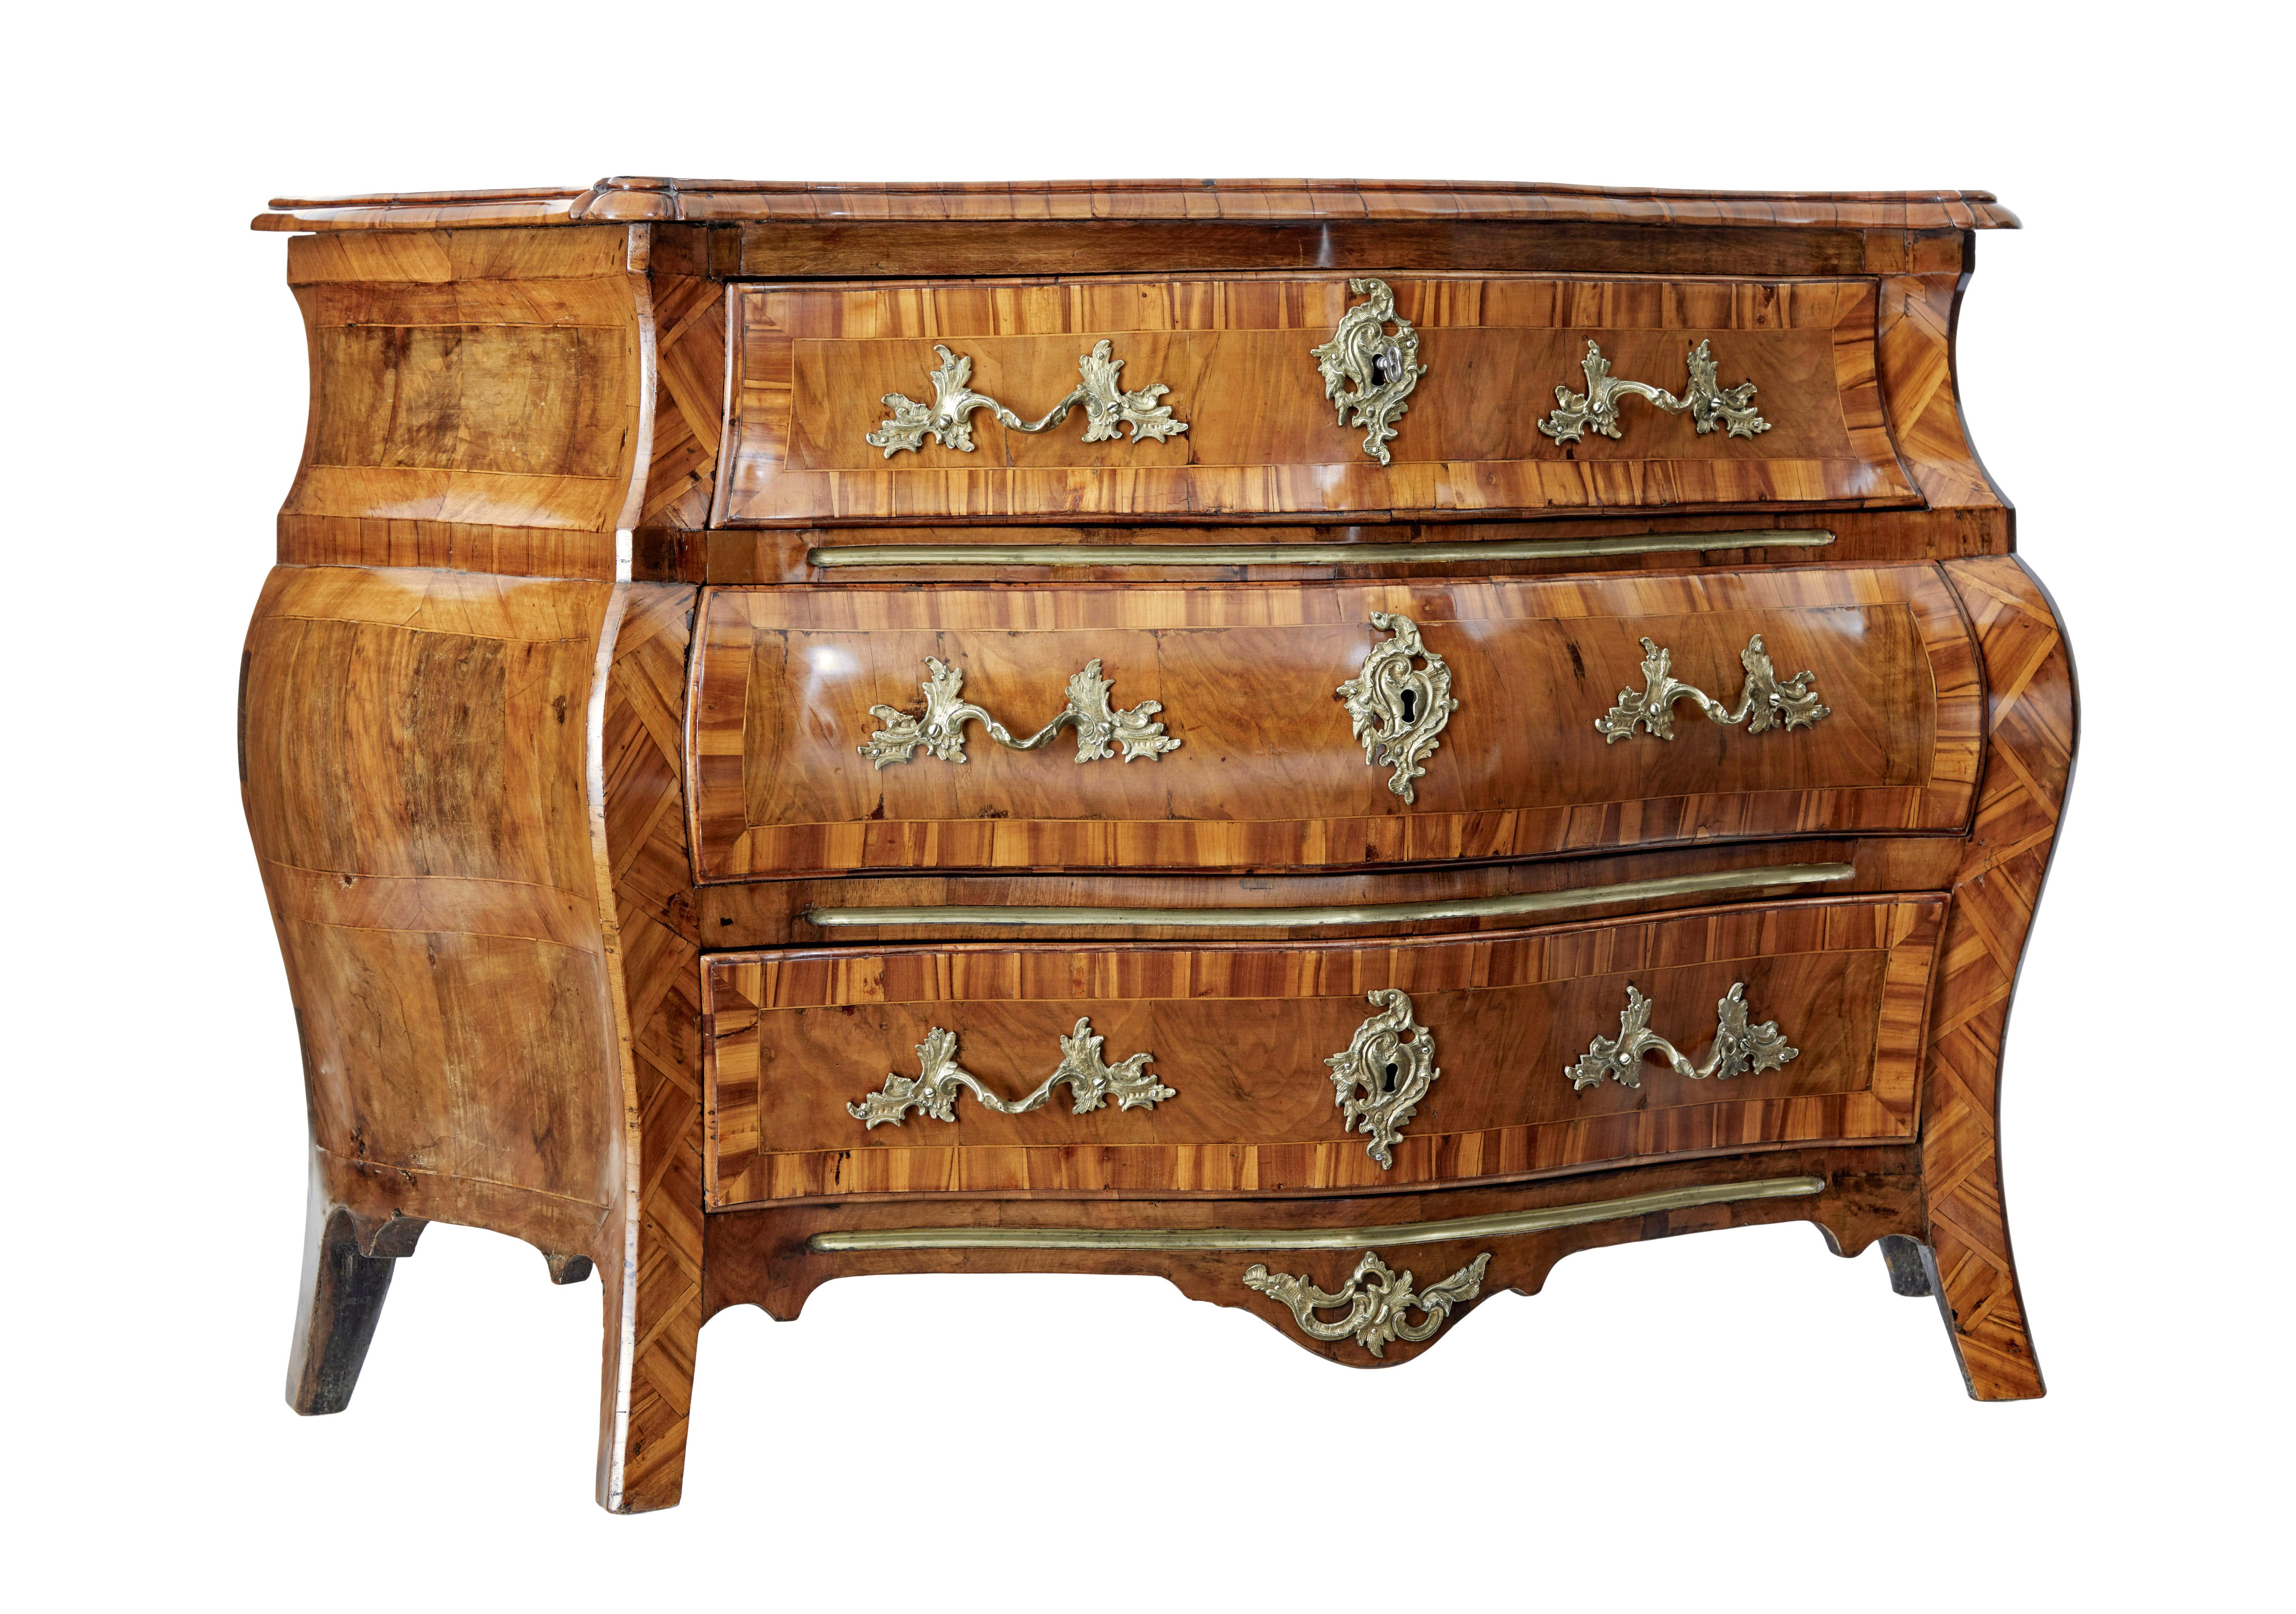 Early 19th century inlaid walnut bombe chest of drawers circa 1800.

Fine quality Swedish rococo revival commode with the typical bombe shape of bulging out in the middle and curving in at the base.

Shaped walnut top surface with patches to replace